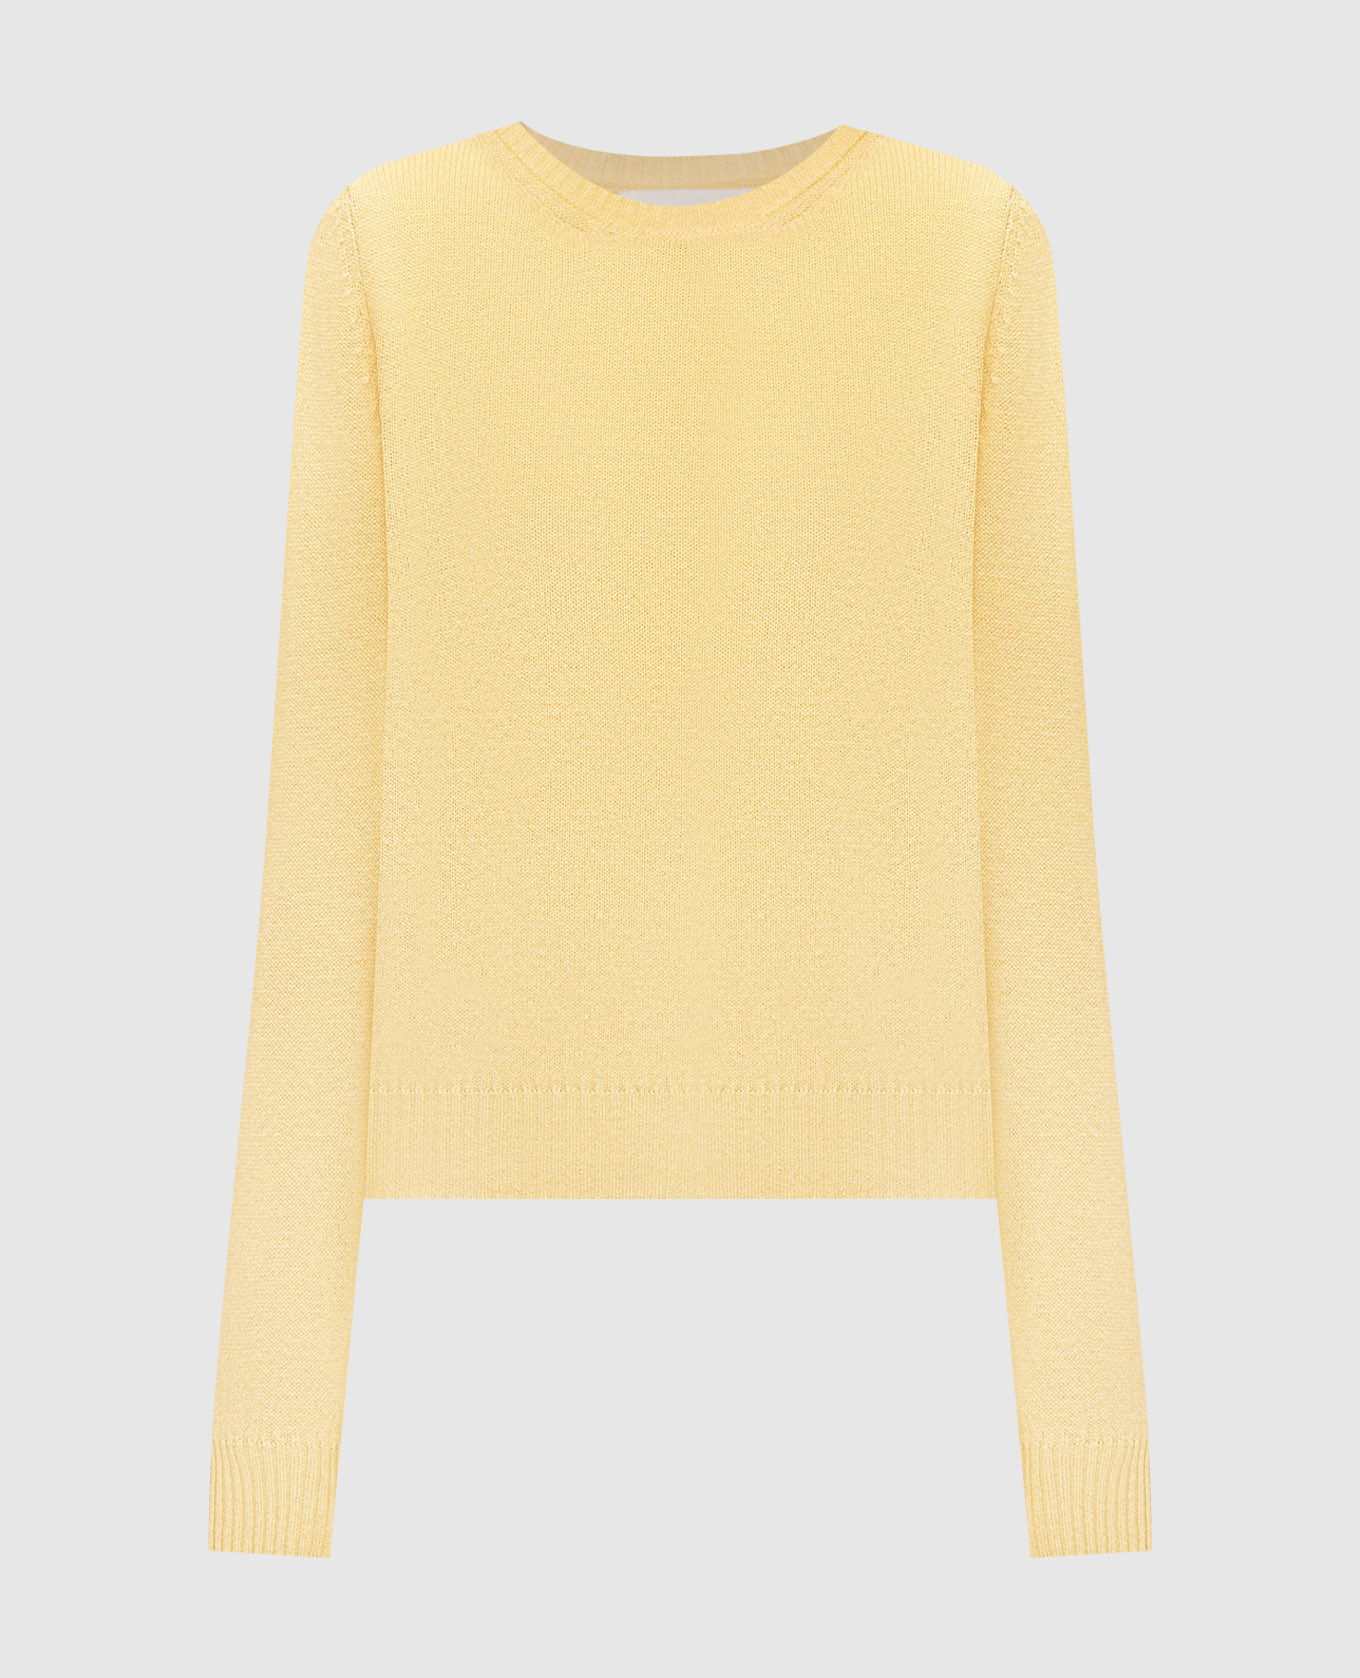 Yellow cashmere jumper